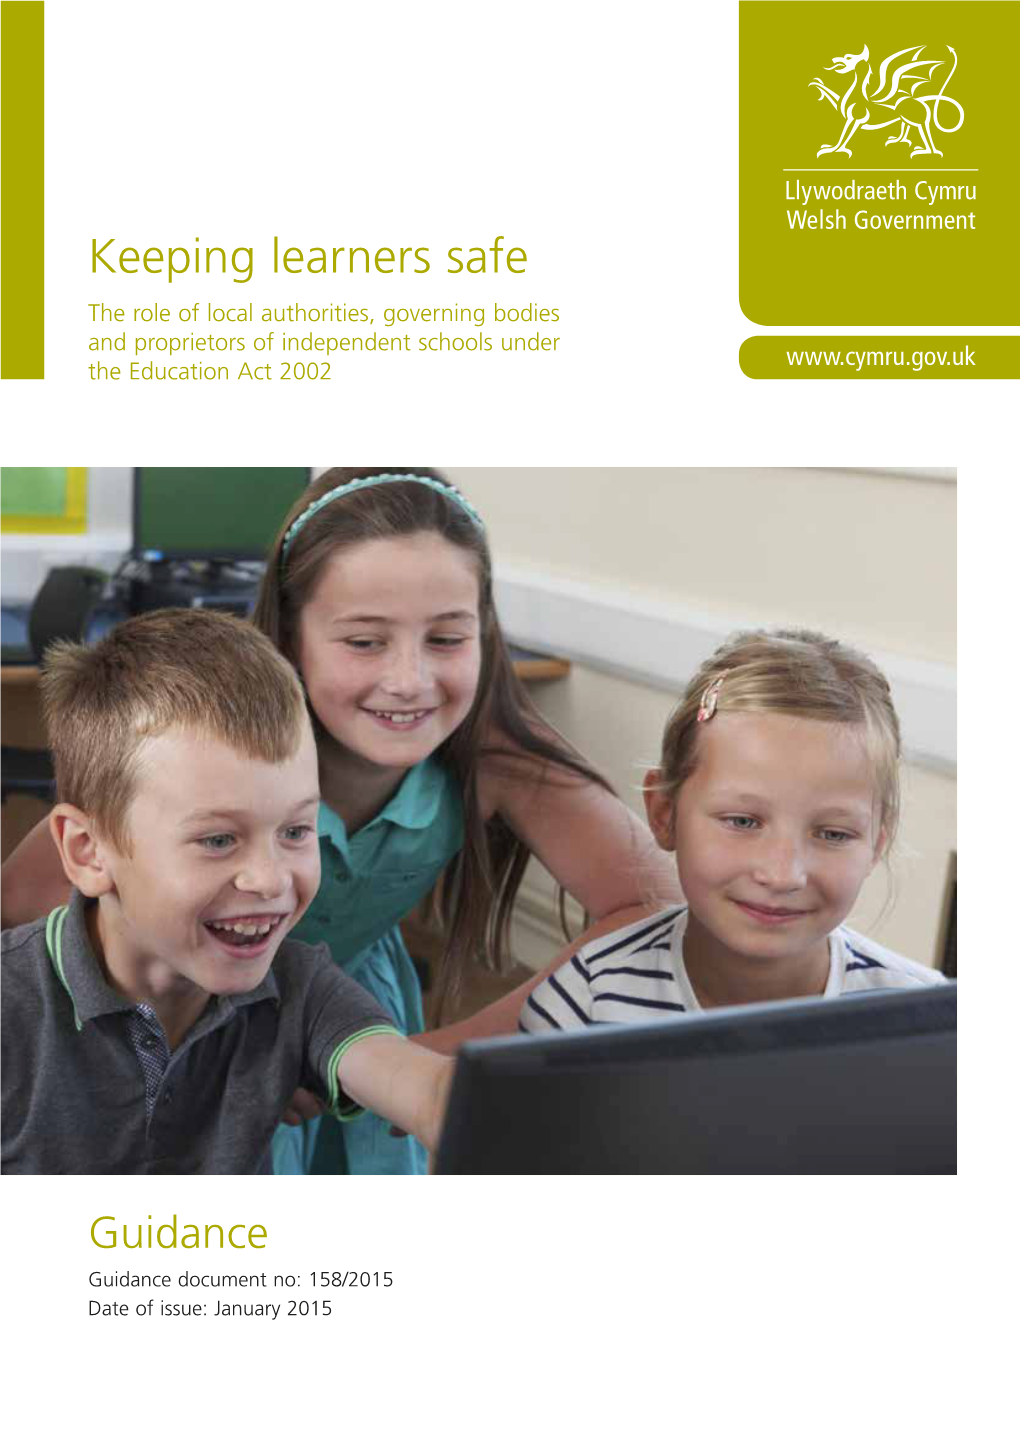 Keeping Learners Safe the Role of Local Authorities, Governing Bodies and Proprietors of Independent Schools Under the Education Act 2002